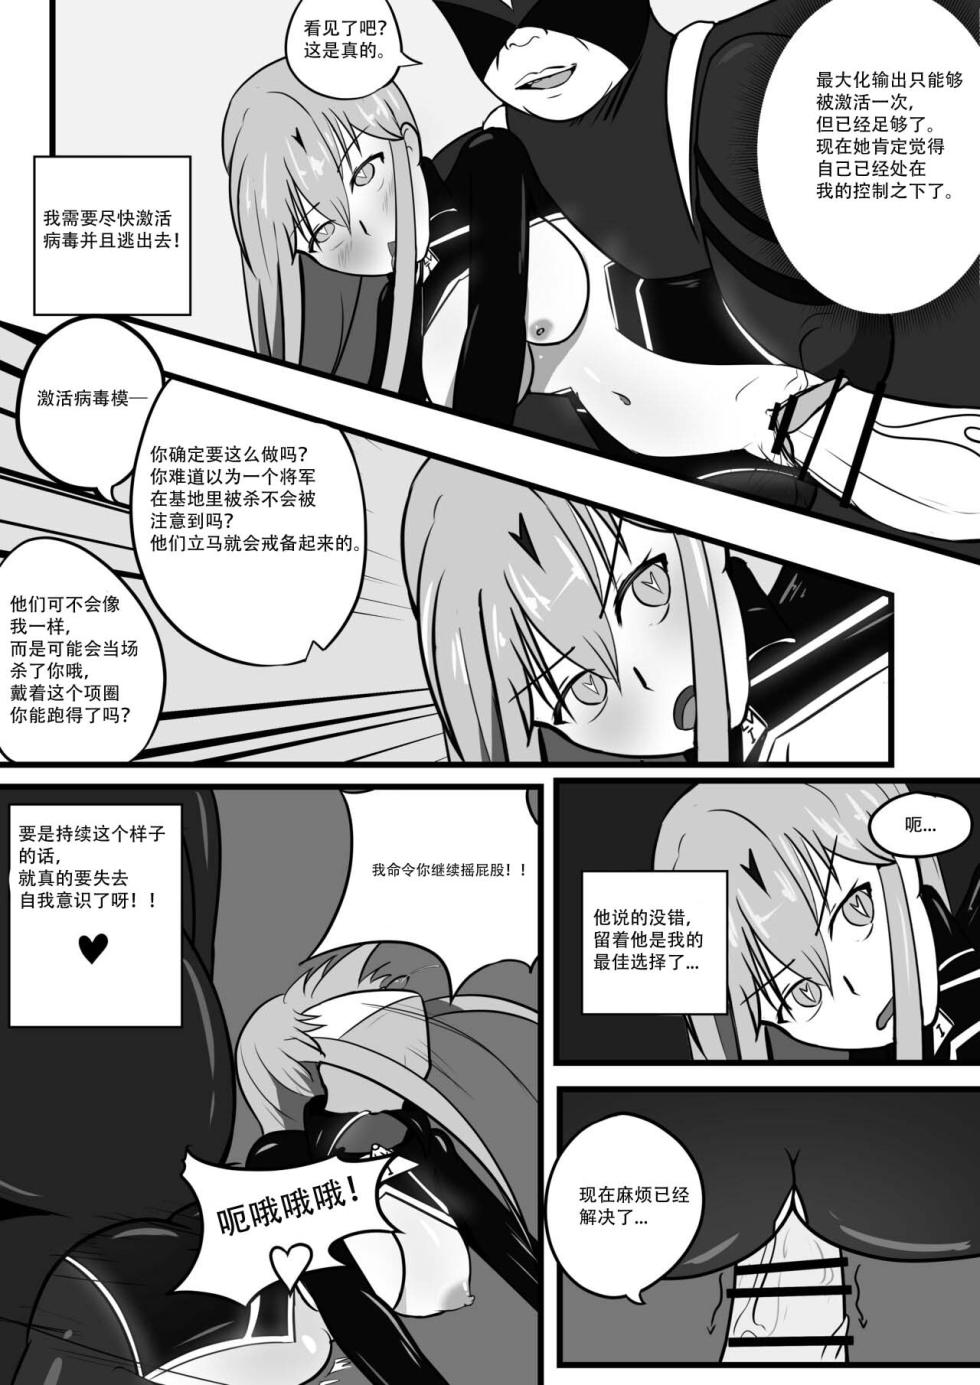 [Aynes] The Degradation of Angels [心海汉化组] - Page 15